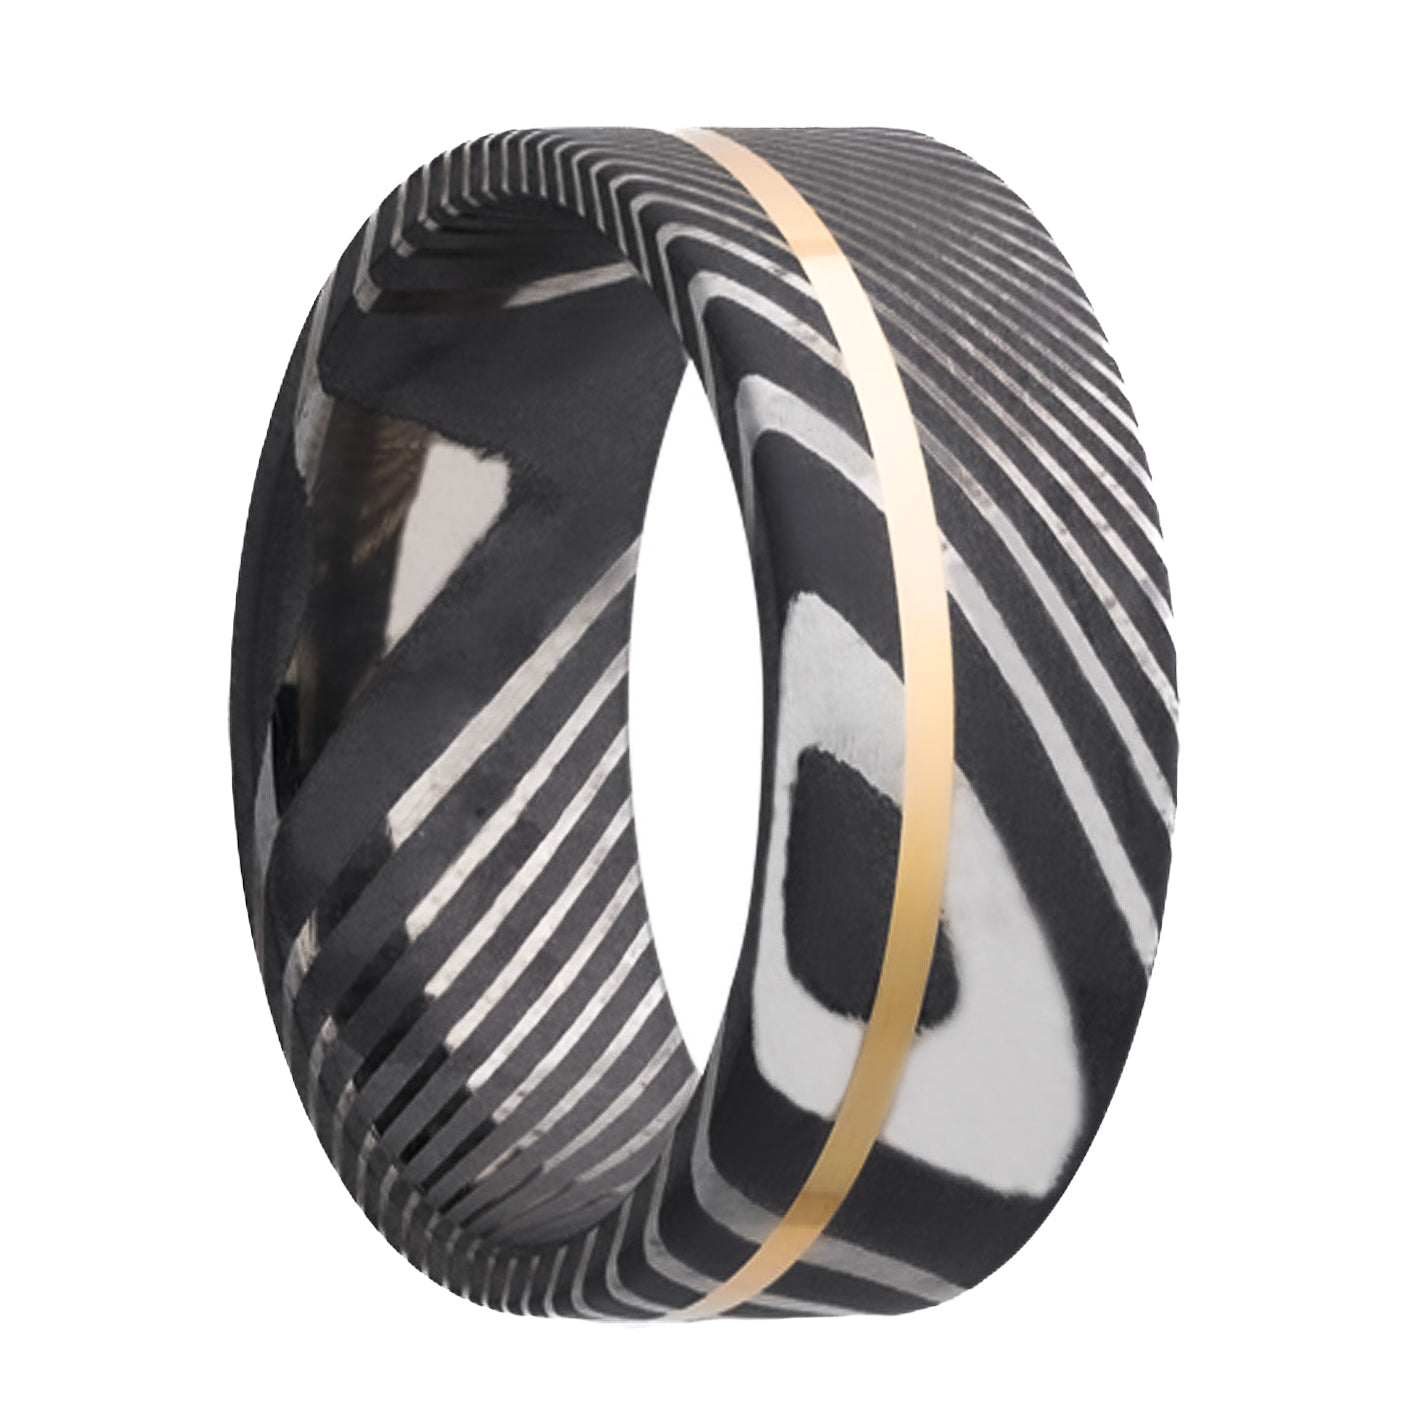 A asymmetrical 14k yellow gold inlay damascus men's wedding band displayed on a neutral white background.